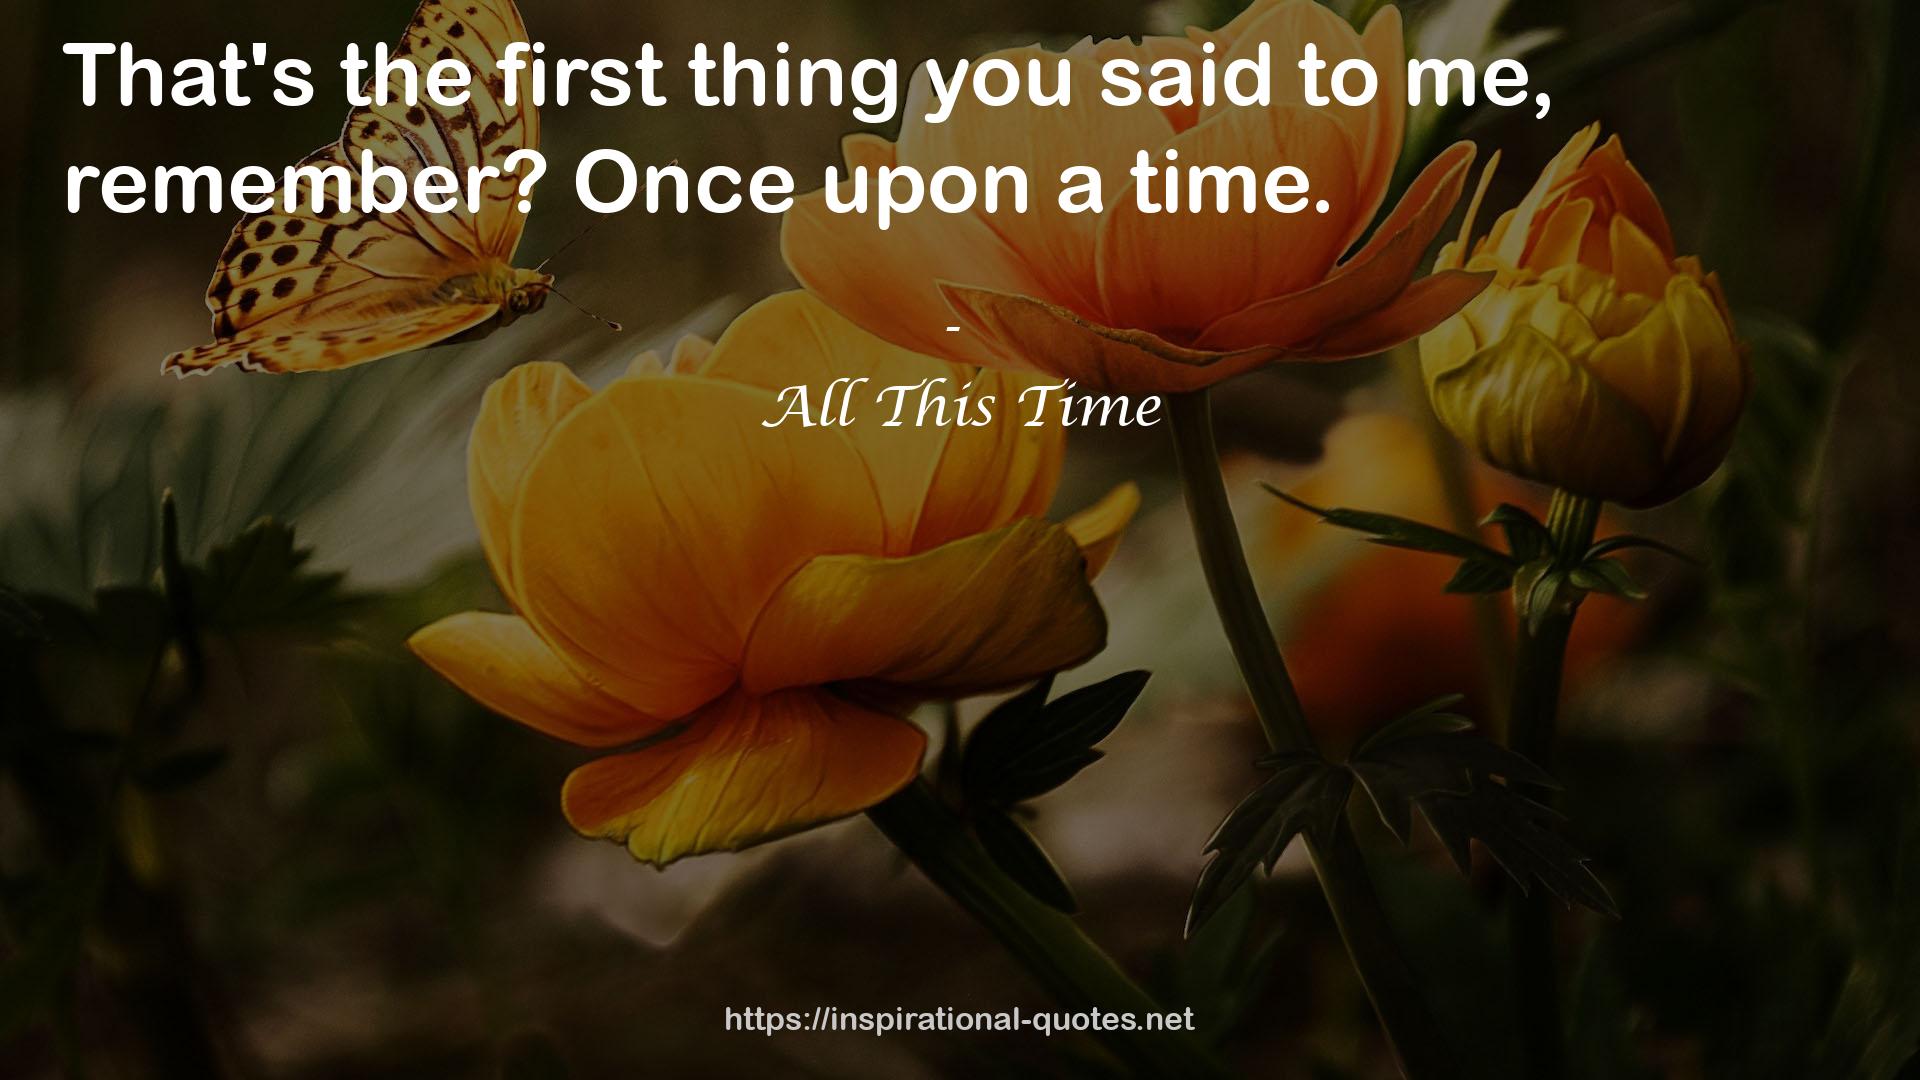 All This Time QUOTES